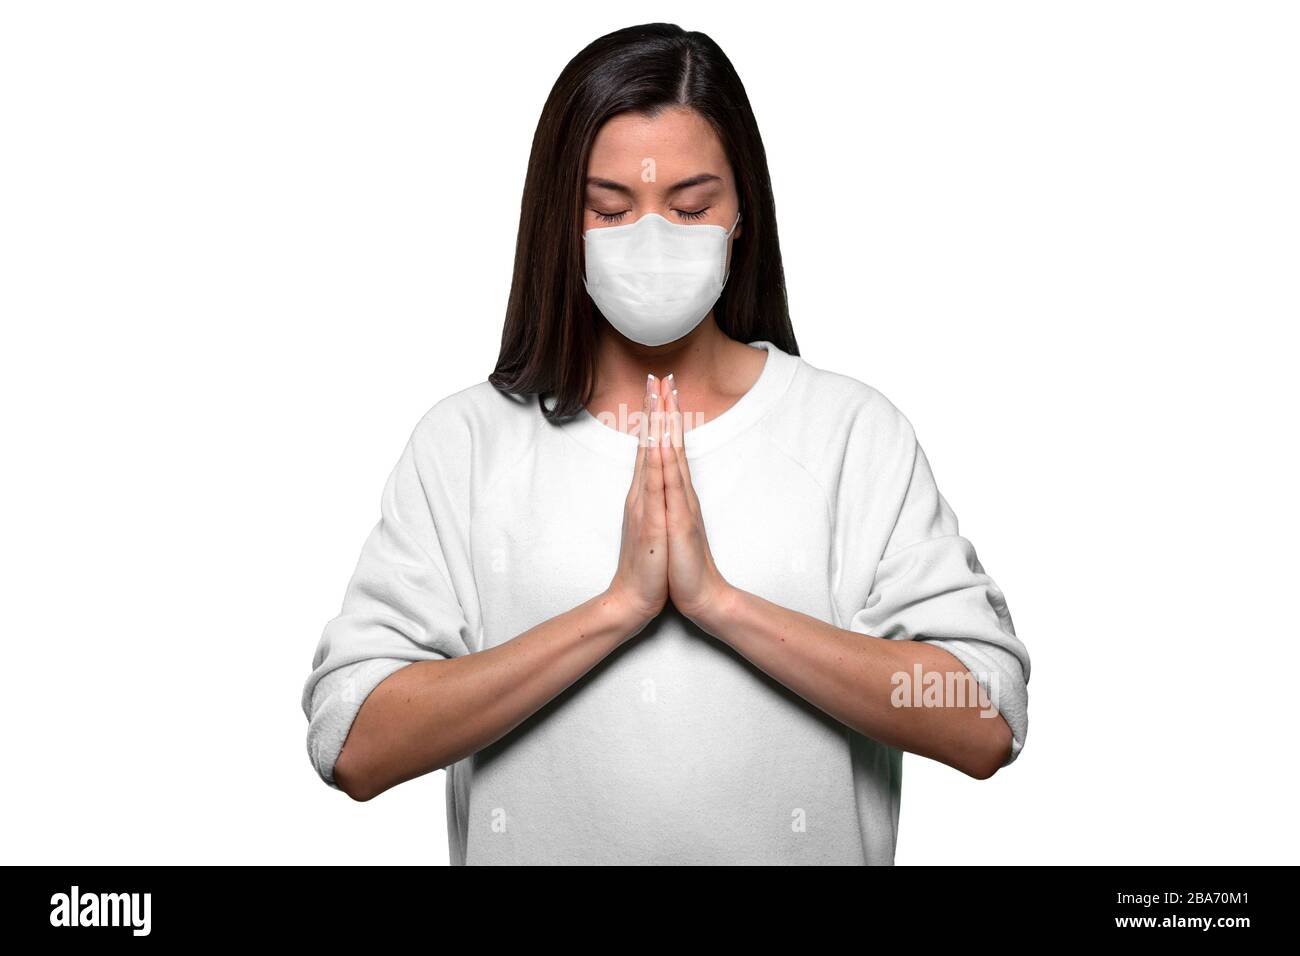 Asian american woman staying calm and finding peace through prayer and meditation during pandemic crisis Stock Photo